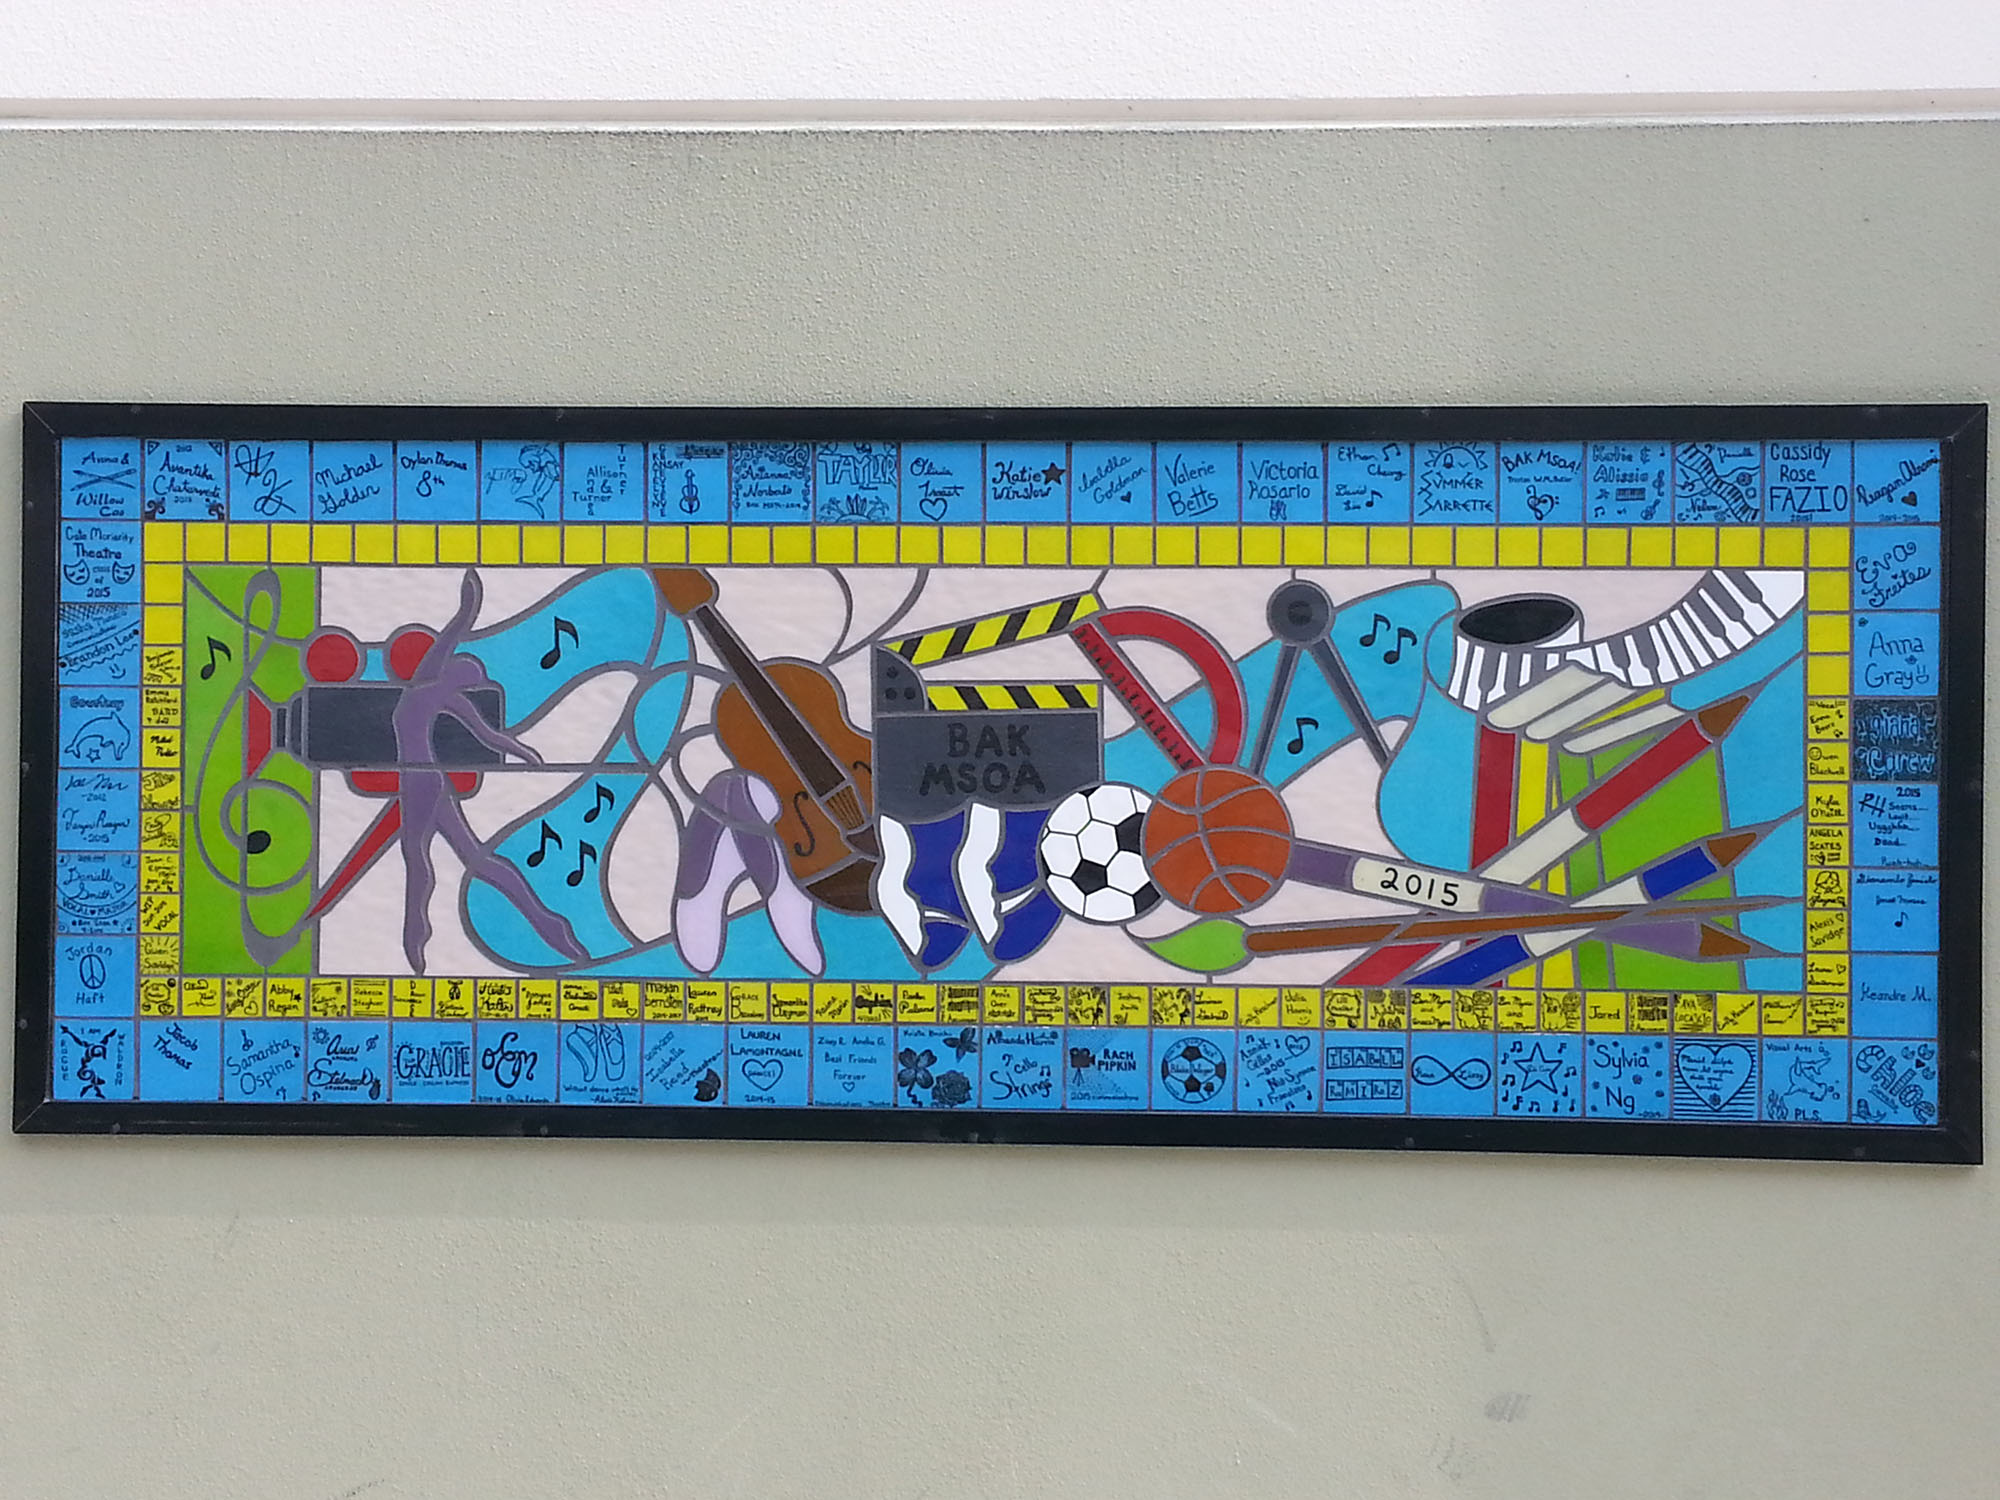 Traditional style mosaic of artistic objects with many colorful pieces of glass in blue and yellow.